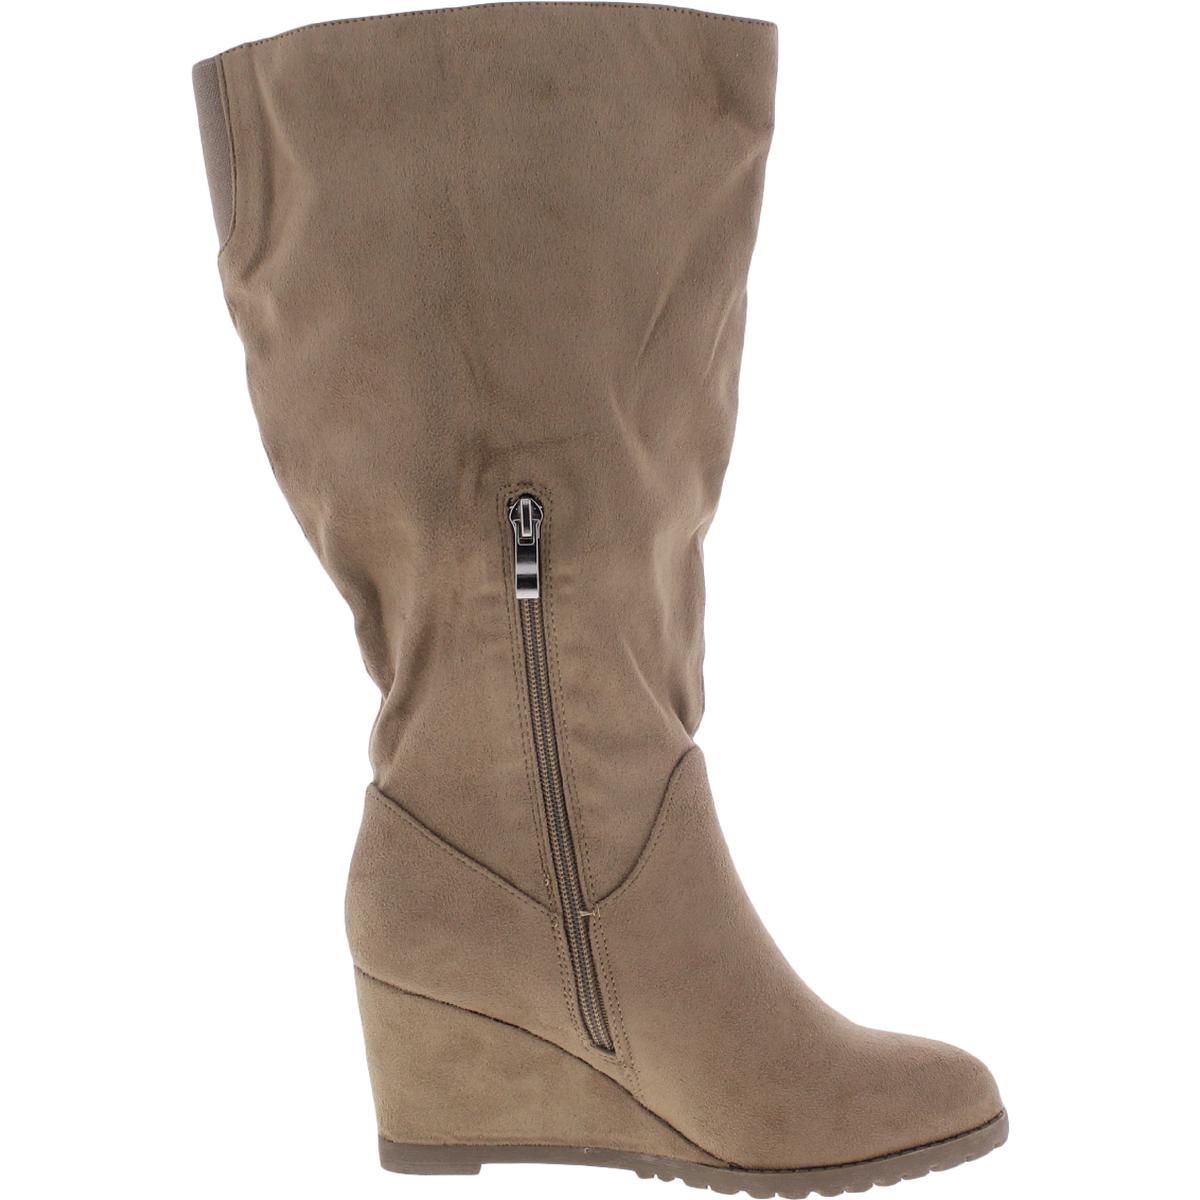 Journee Collection Womens Extra Wide Calf Faux Suede Mid-Calf Boots